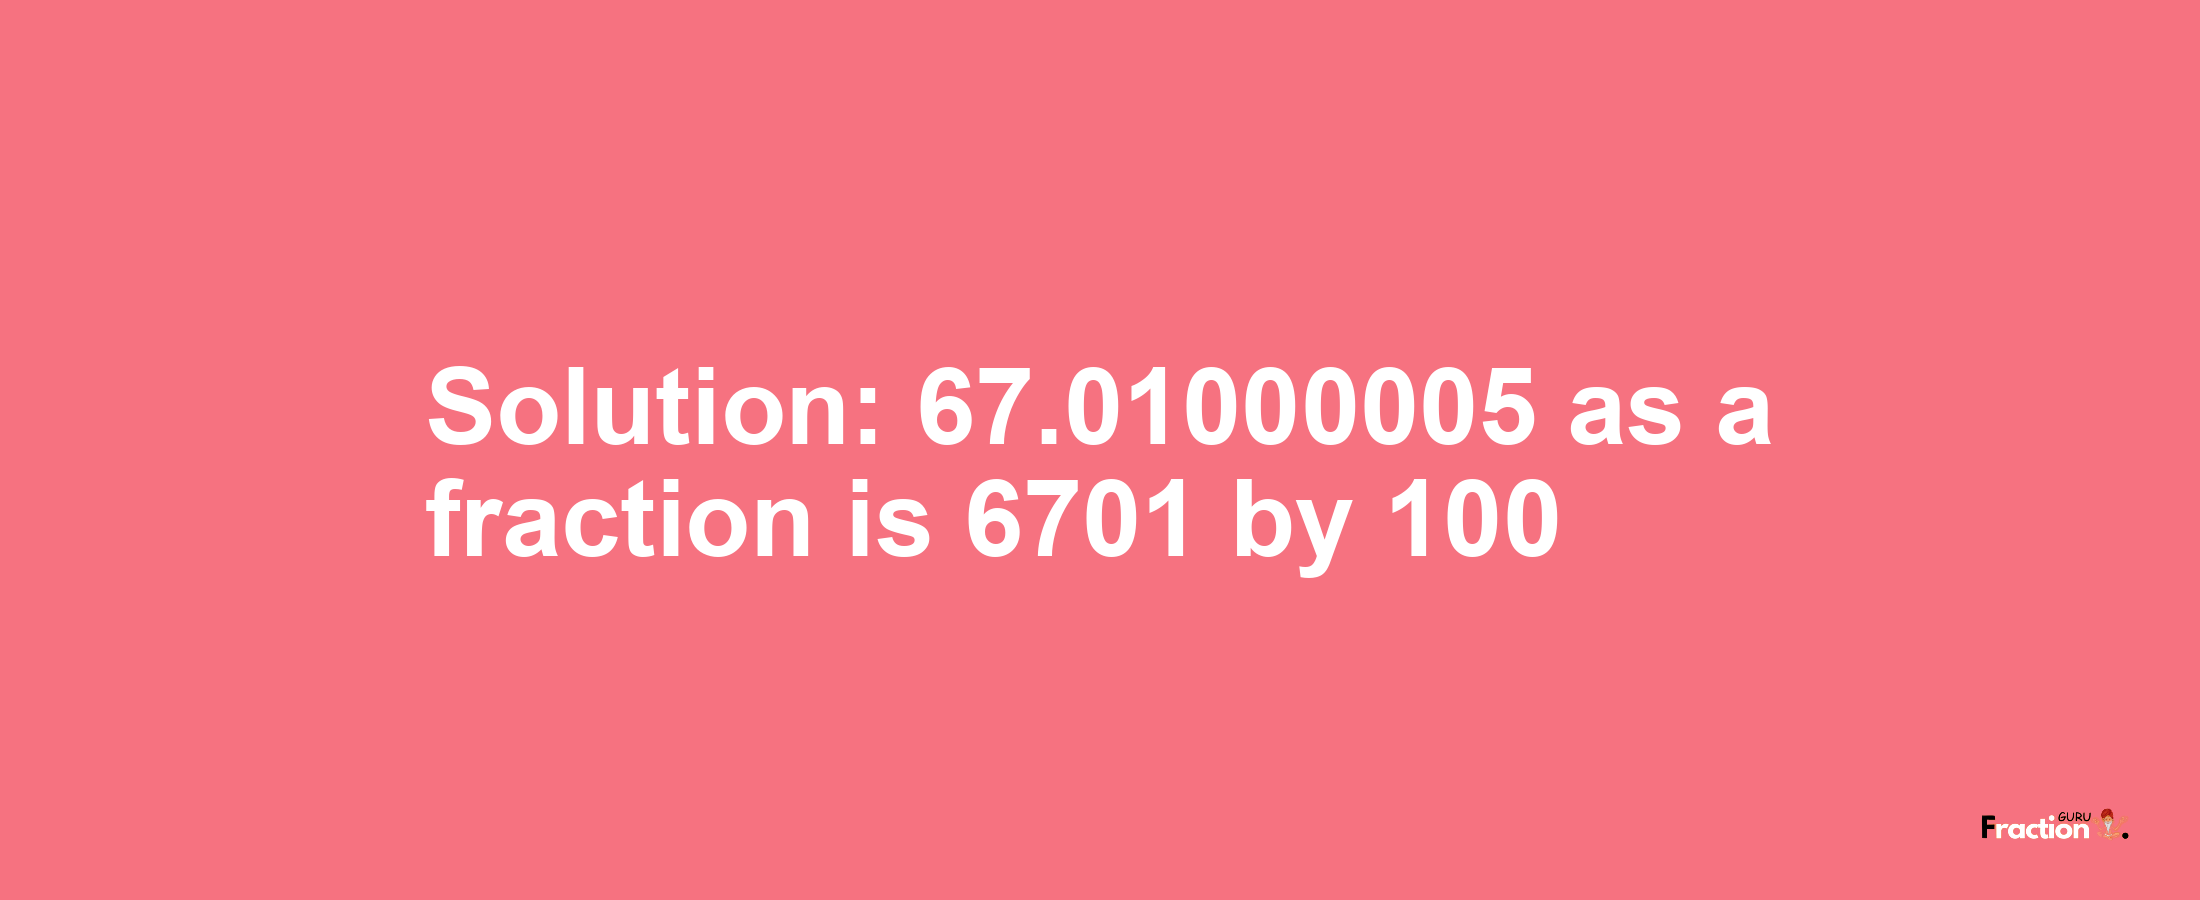 Solution:67.01000005 as a fraction is 6701/100